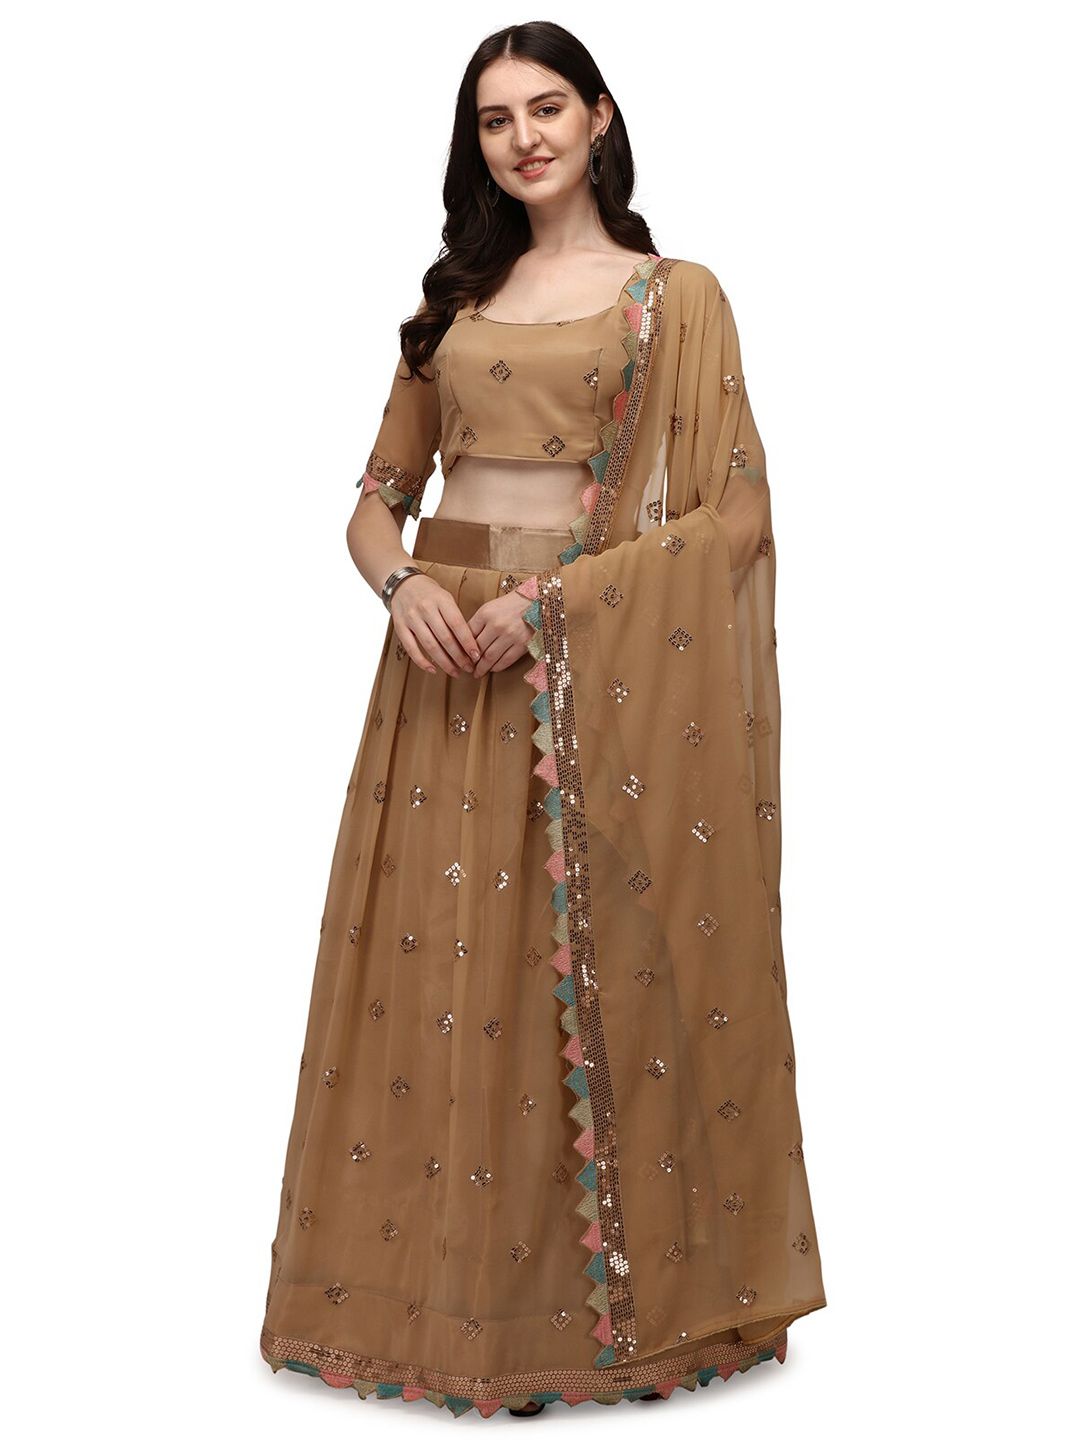 Pratham Blue Beige Embroidered Sequinned Semi-Stitched Lehenga & Unstitched Blouse With Dupatta Price in India